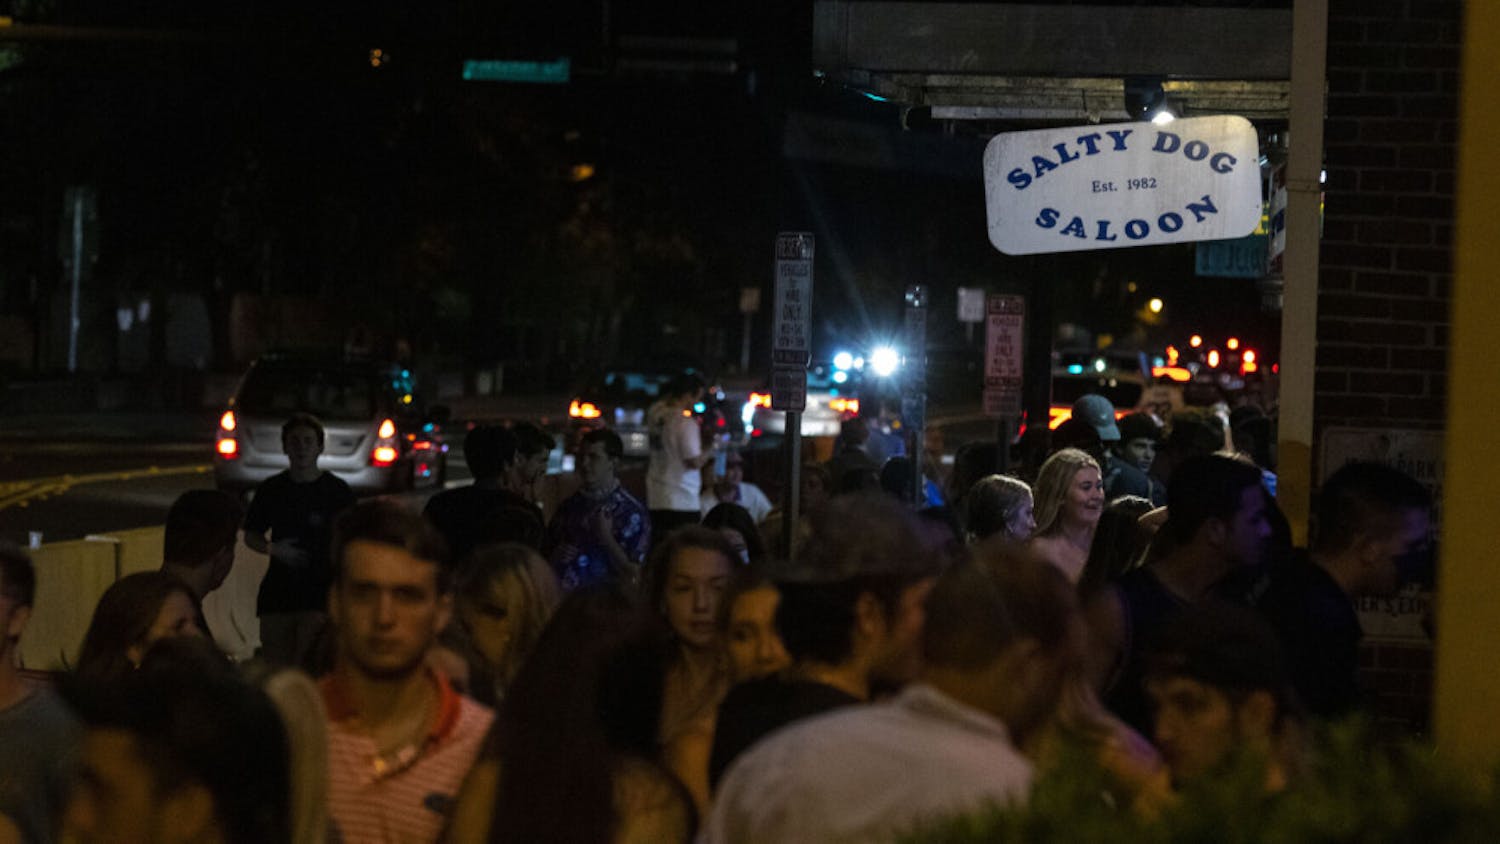 More than 50 people are seen waiting outside next to Salty Dog Saloon and Fat Daddy’s, located at Midtown off of West University Avenue, in Gainesville on Saturday night, after the first home football game. (Zachariah Chou/Alligator Staff)